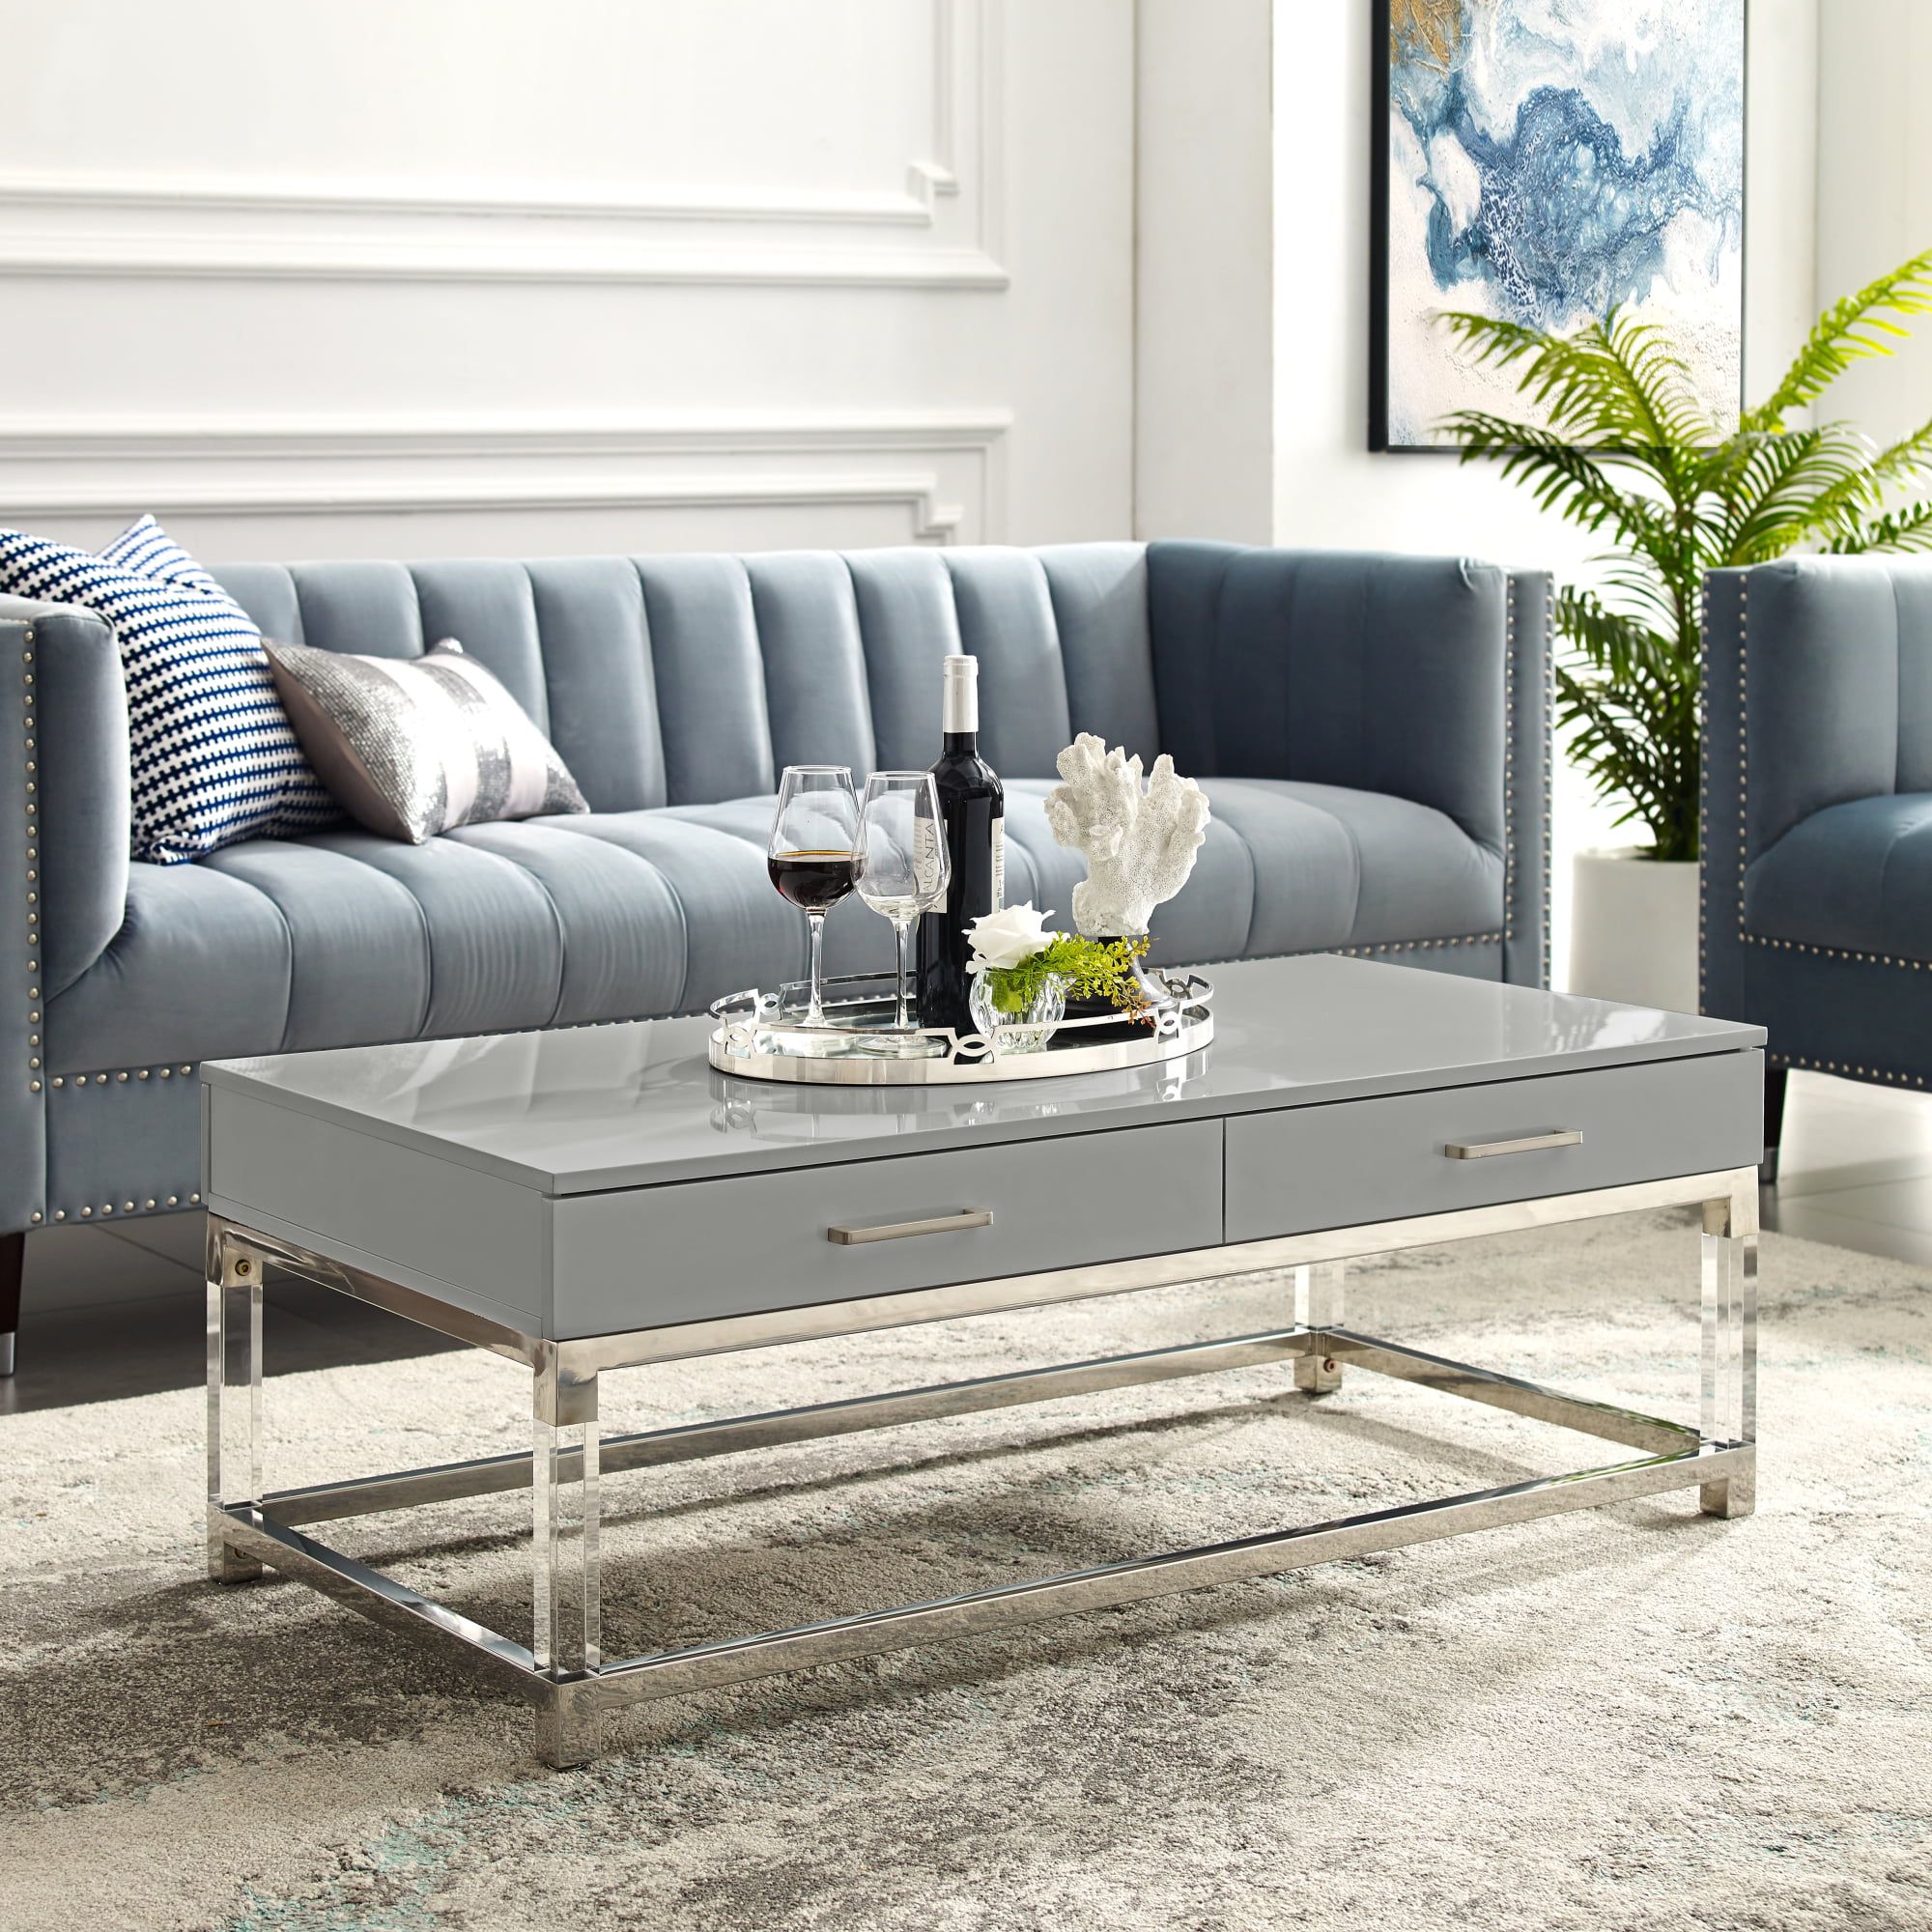 Alena Grey Coffee Table – 2 Drawers | High Gloss | Acrylic Legs Intended For Glossy Finished Metal Coffee Tables (View 8 of 15)